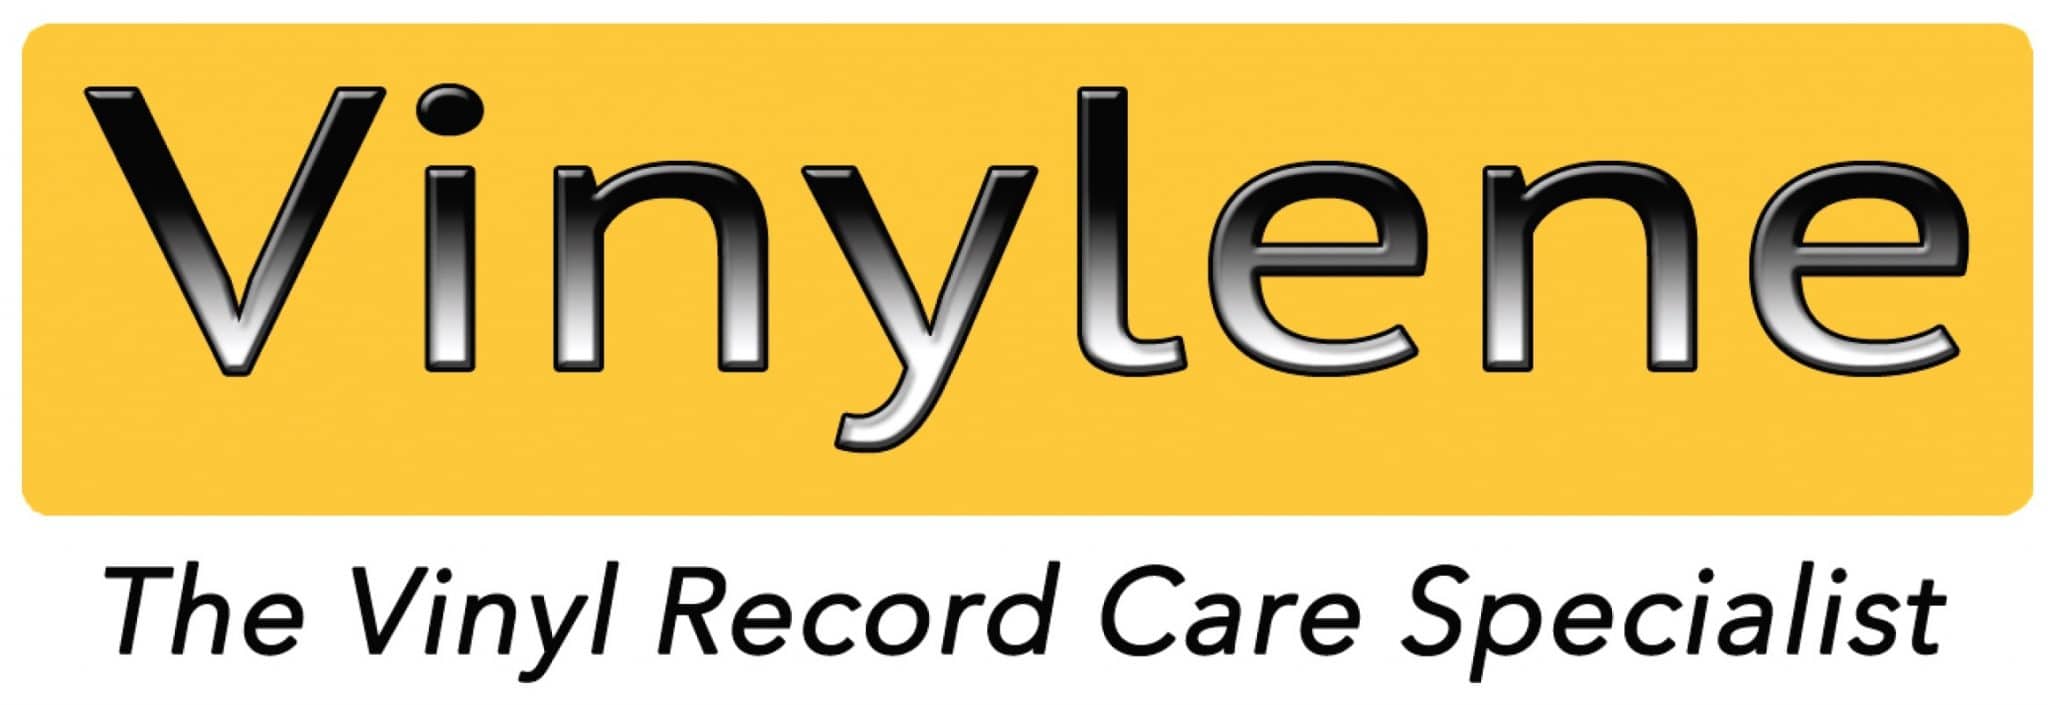 Pro-Clean from Vinylene UK: Vinyl Record Cleaning service